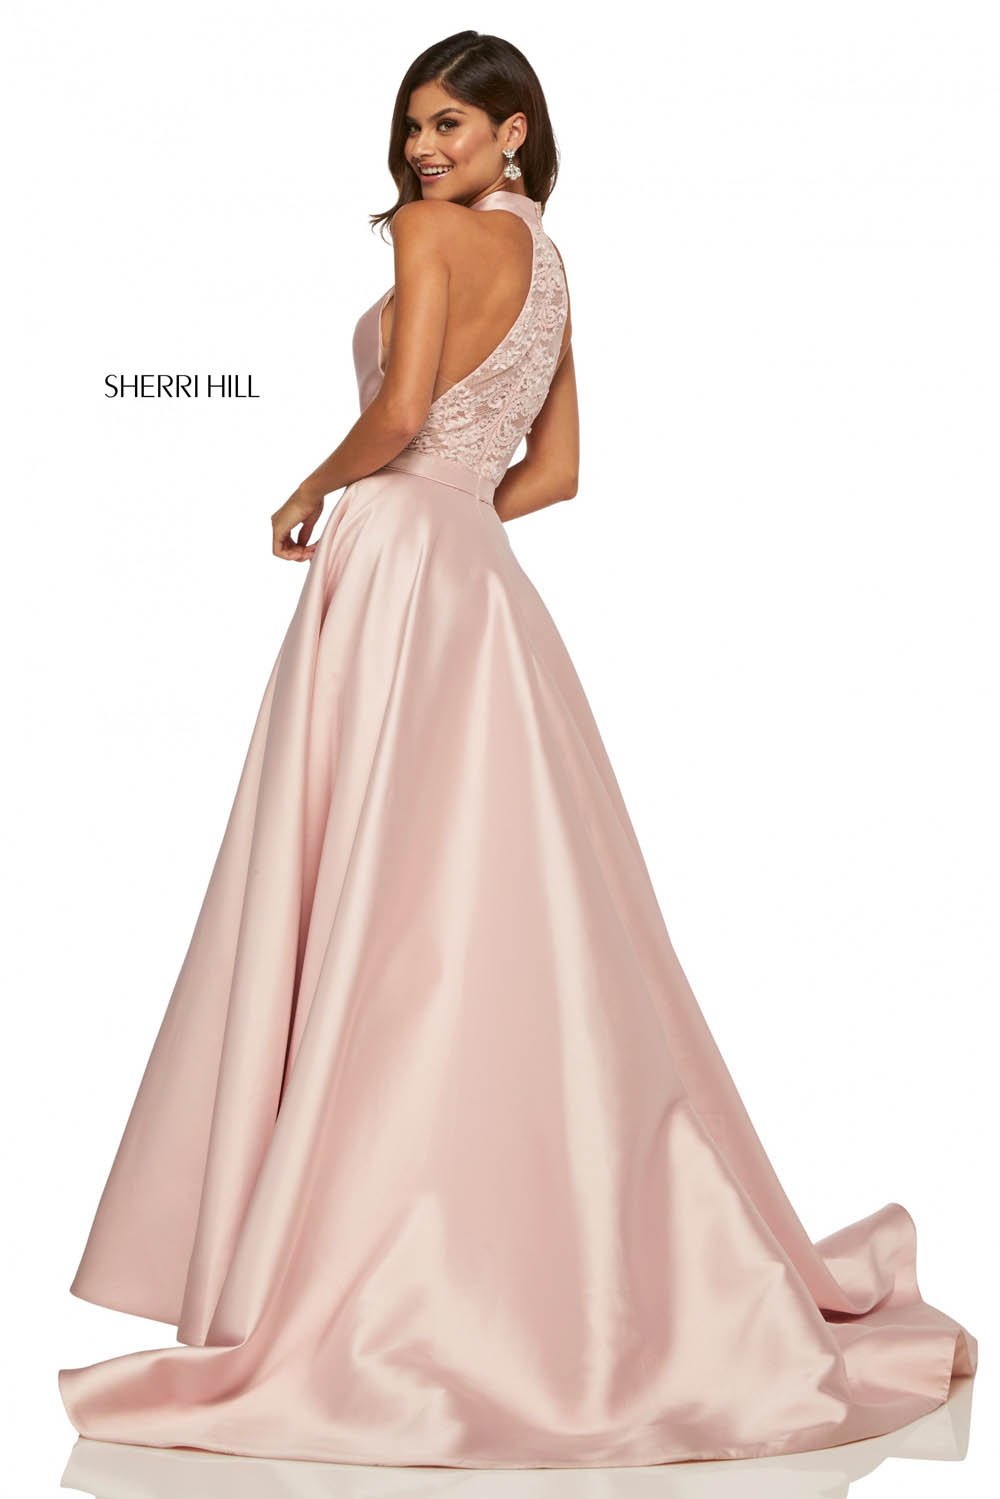 Sherri Hill 52573 dress images in these colors: Blush, Light Blue, Pink, Yellow, Black, Red.